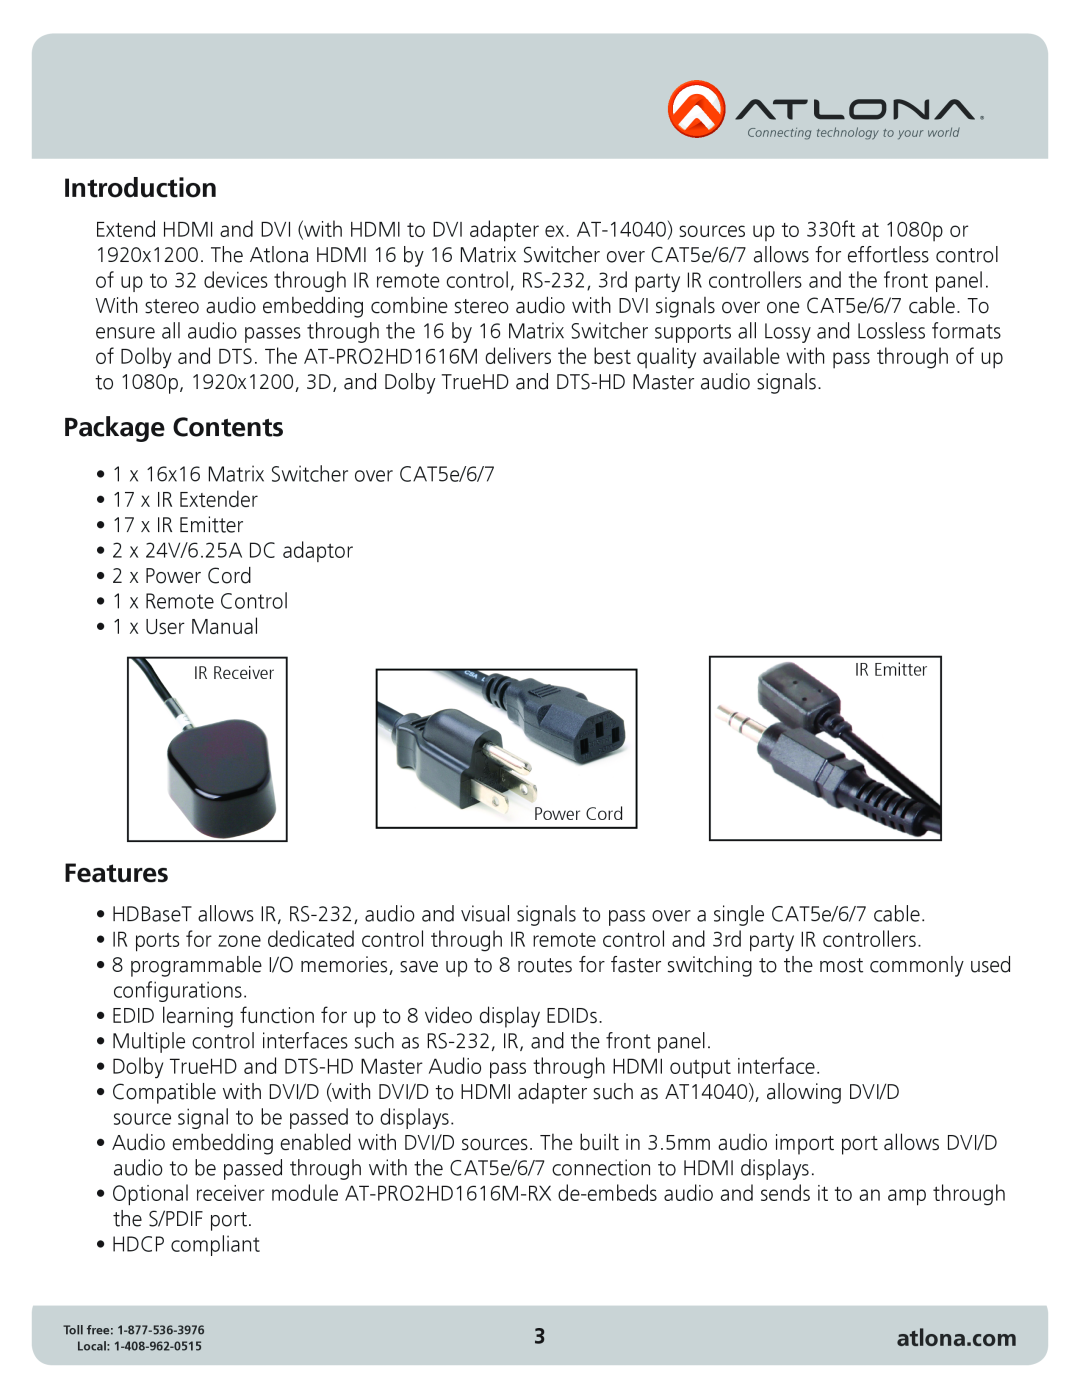 Atlona AT-PRO2HD1616M user manual Introduction, Package Contents, Features, atlona.com 